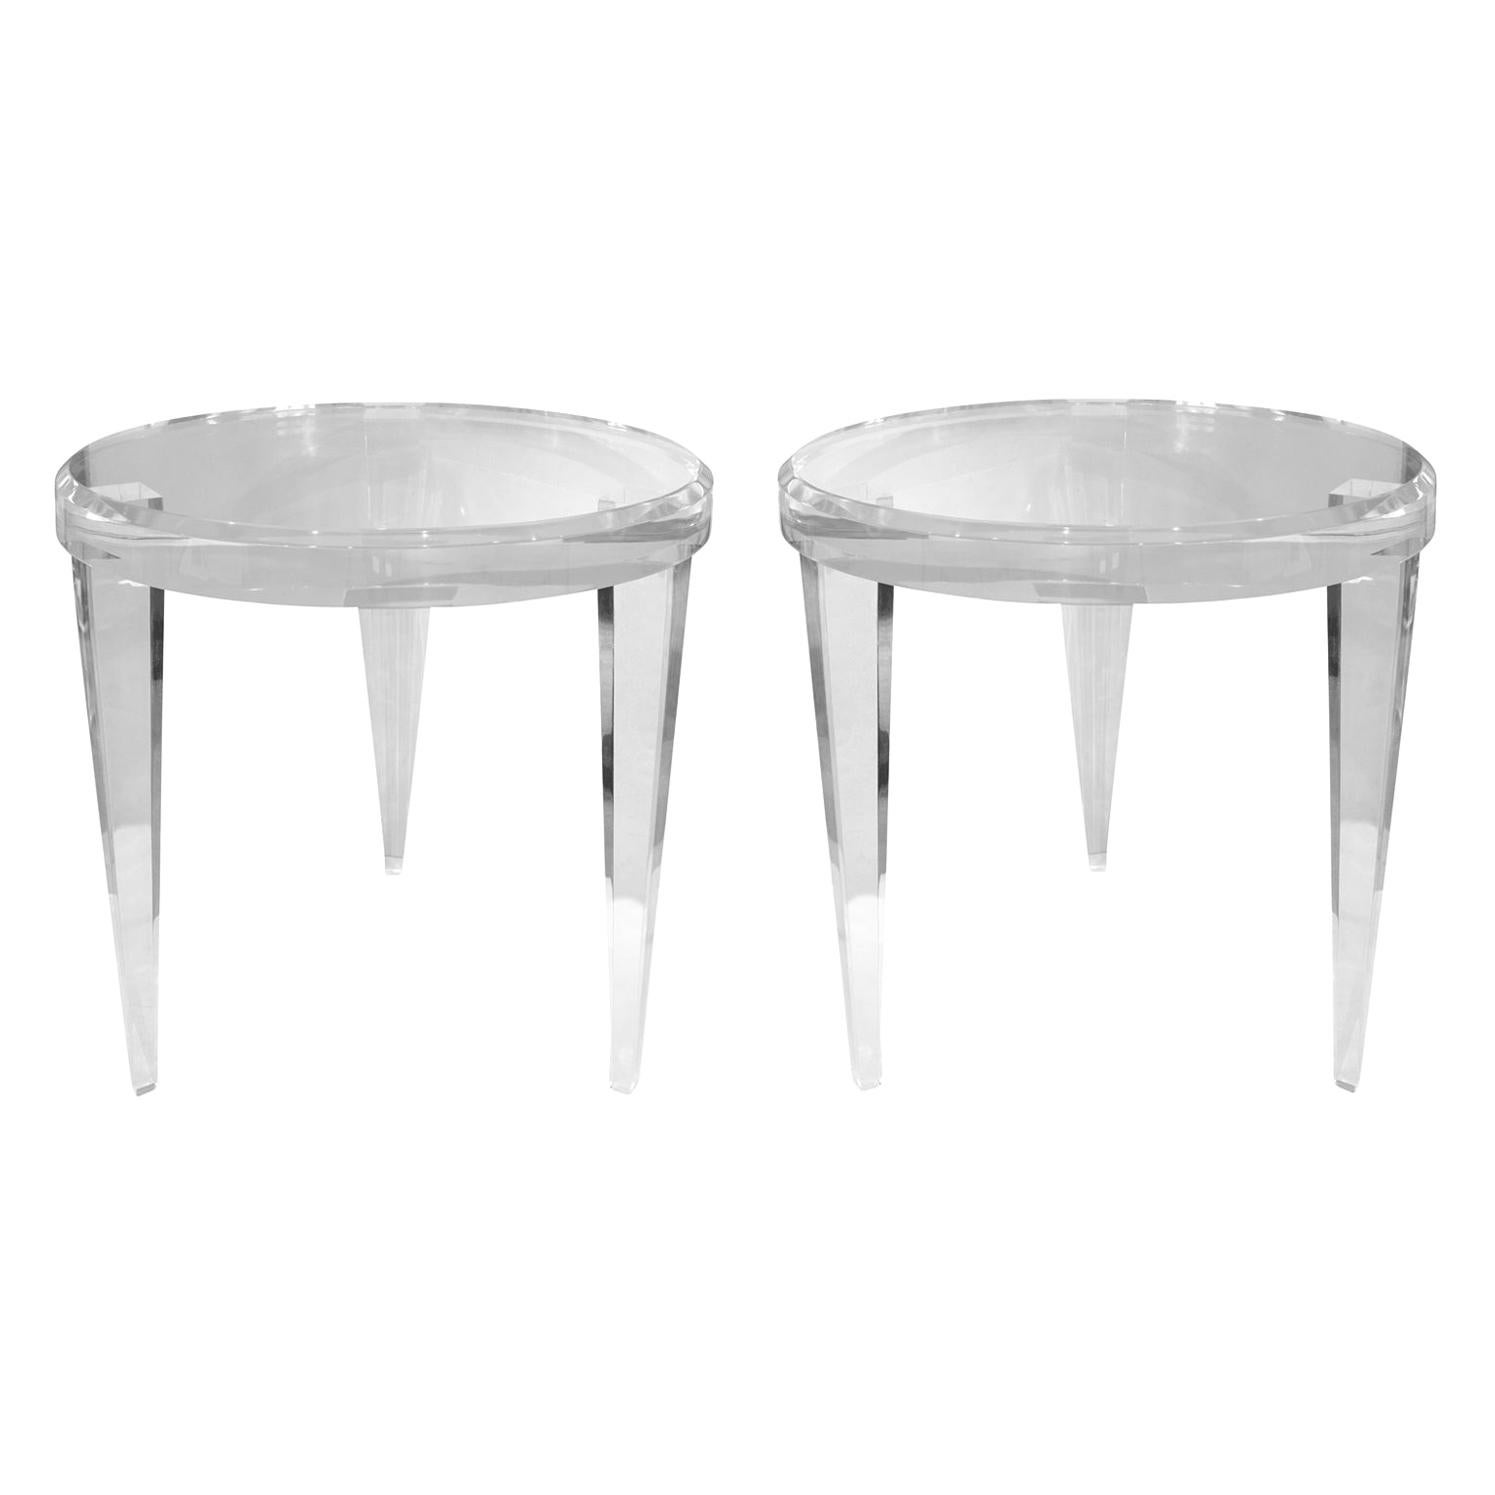 Pair of Sculptural Round End Tables in Solid Lucite, 1990s